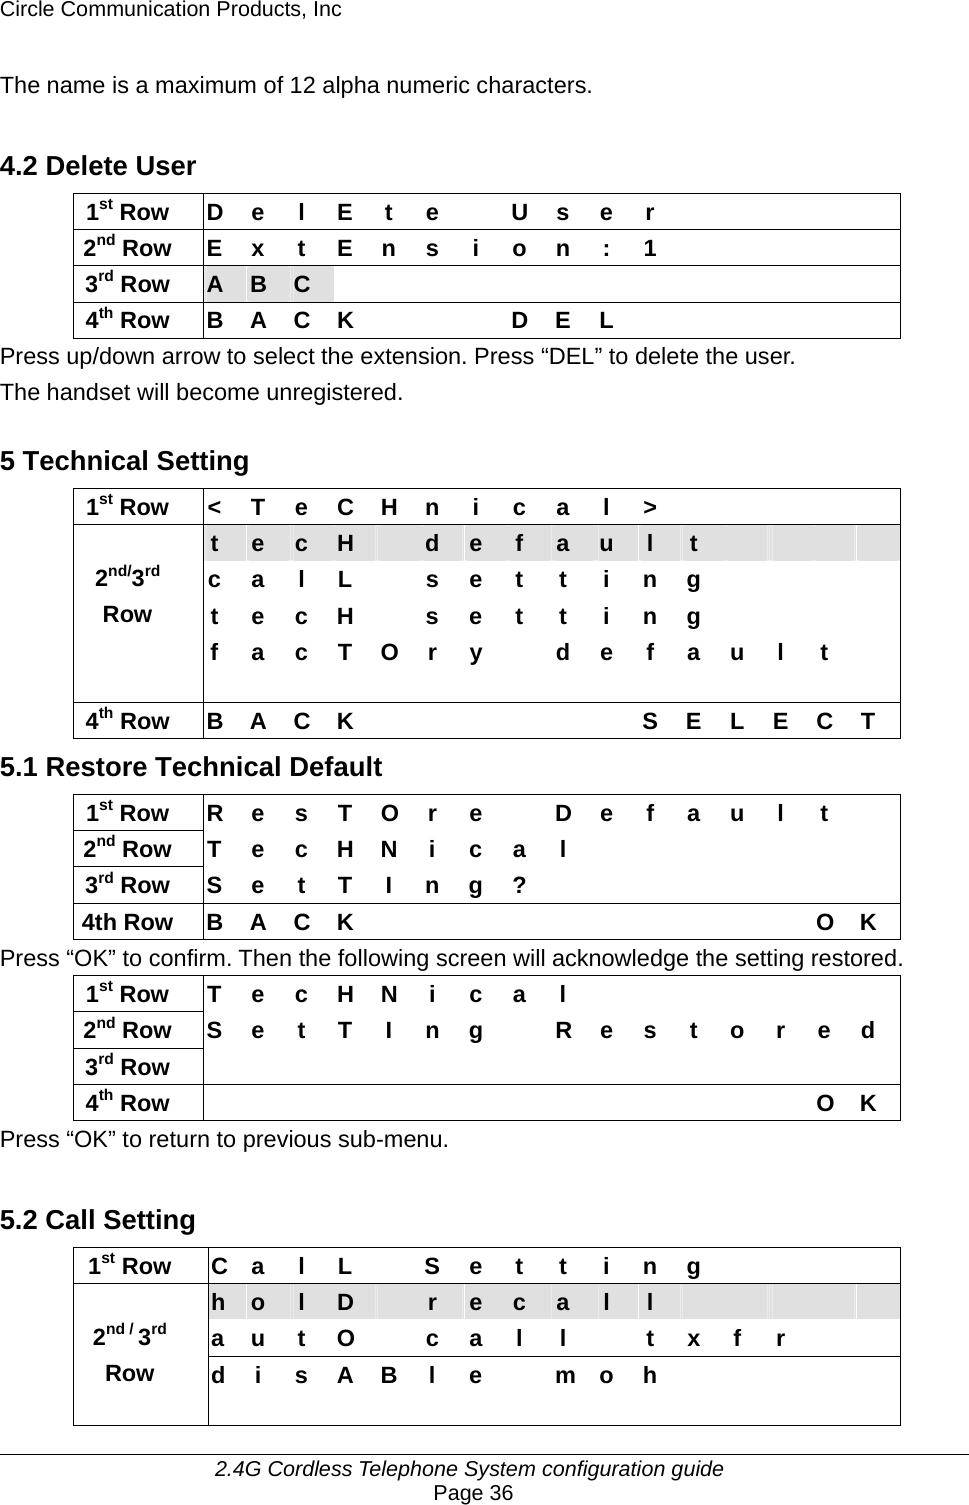 Circle Communication Products, Inc     2.4G Cordless Telephone System configuration guide Page 36 The name is a maximum of 12 alpha numeric characters.  4.2 Delete User 1st Row  D e  l  E  t  e    U s e  r           2nd Row  E x t E n s  i  o n : 1           3rd Row  A  B  C               4th Row B A C K    D E L       Press up/down arrow to select the extension. Press “DEL” to delete the user. The handset will become unregistered.  5 Technical Setting 1st Row  &lt; T e C H n i c a l &gt;          t  e  c  H   d  e  f  a  u  l  t         c a l L    s e t  t  i n g         t e c H   s e t t i n g         2nd/3rd Row   f a c T O r y   d e f a u l t   4th Row B A C K       S E L E C T 5.1 Restore Technical Default 1st Row  R e s T O r  e    D e  f  a u  l  t   2nd Row T e c H N i c a l        3rd Row S e t T I n g ?         4th Row B A C K           O K Press “OK” to confirm. Then the following screen will acknowledge the setting restored. 1st Row T e c H N i c a l        2nd Row S e t T I n g  R e s t o r e d 3rd Row                 4th Row               O K Press “OK” to return to previous sub-menu.  5.2 Call Setting 1st Row  C a l L  S e t t i n g        h  o  l  D   r  e  c  a  l  l           a u t O  c a l l  t x f r     2nd / 3rd Row  d i s A B l e  m o h          